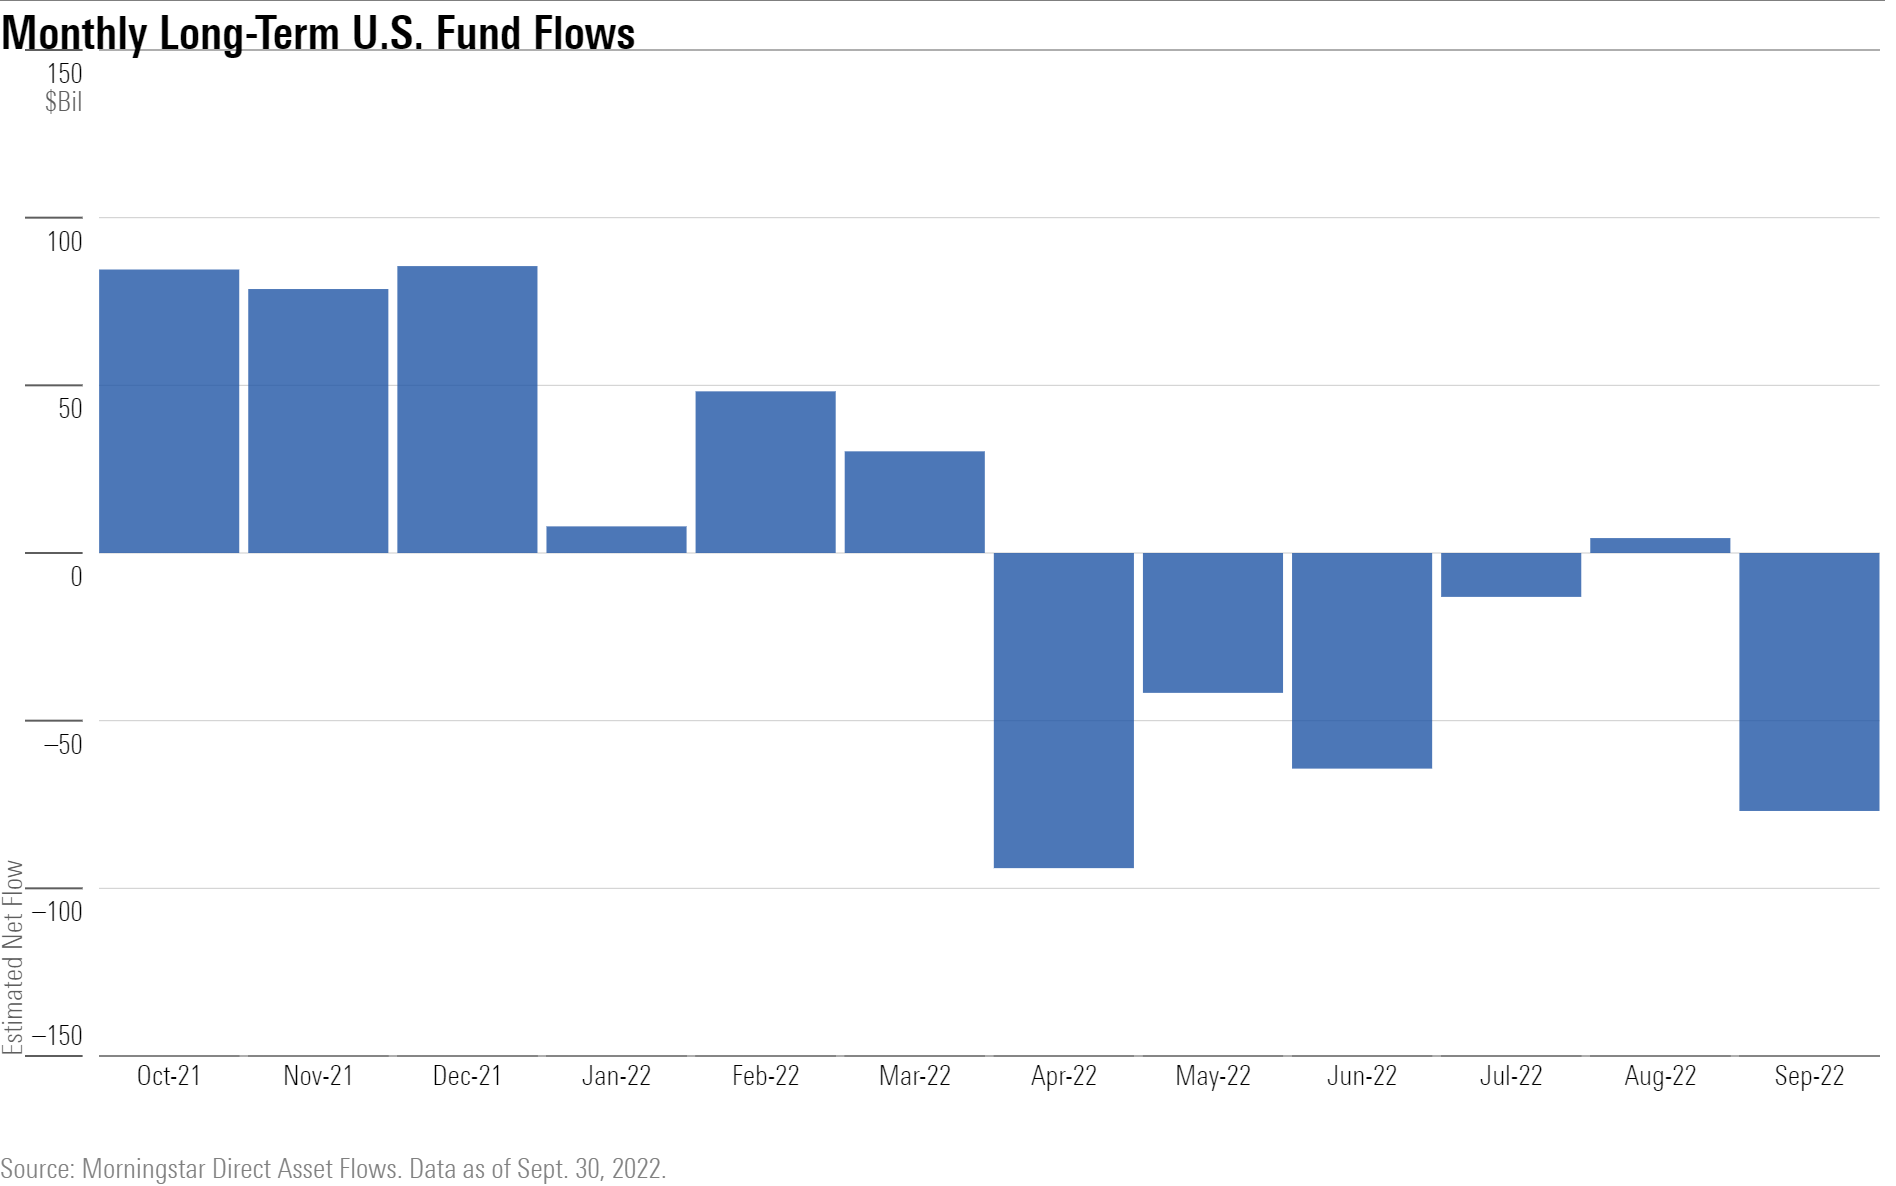 Investors withdrew $77 billion from U.S. funds in September, their largest monthly outflows since April.